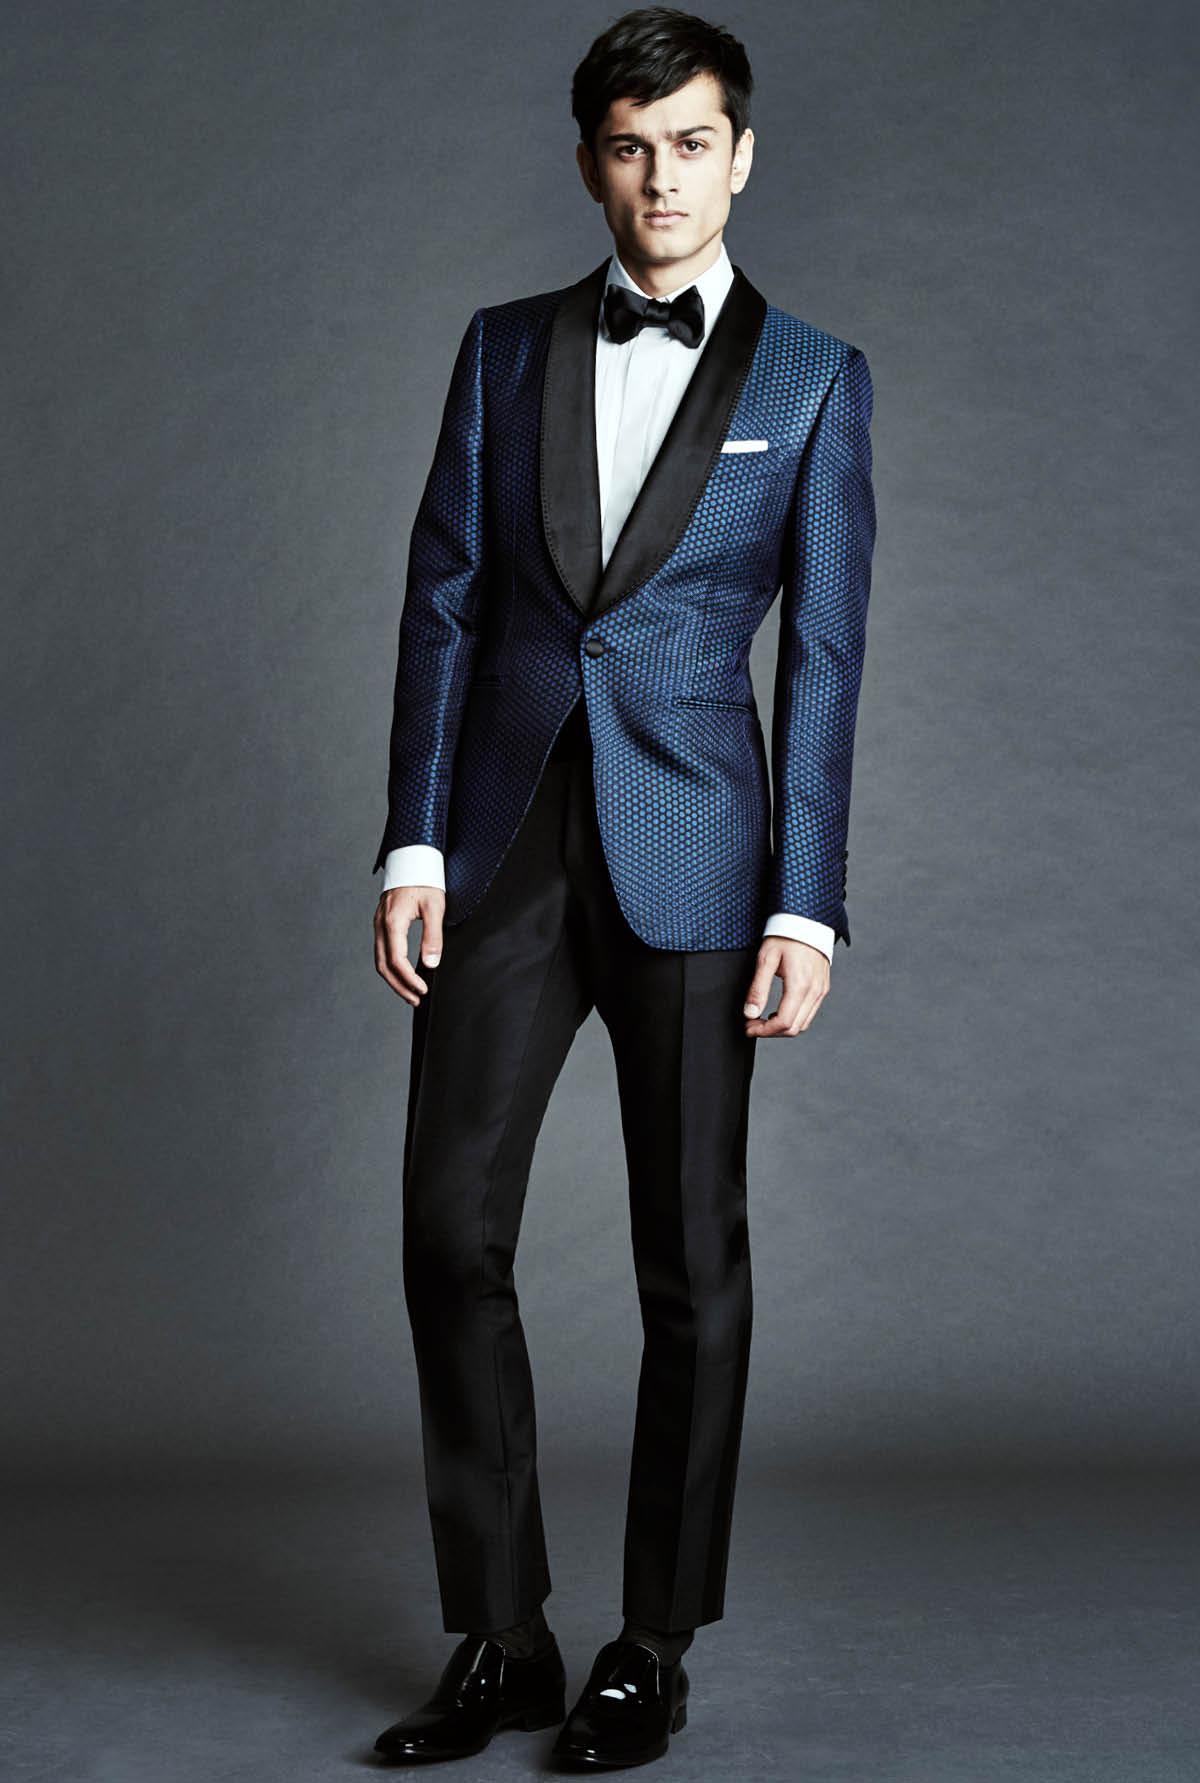 Tom Ford Spring/Summer 2016 Menswear Collection Bridges Gap Between Casual + Formal Styles